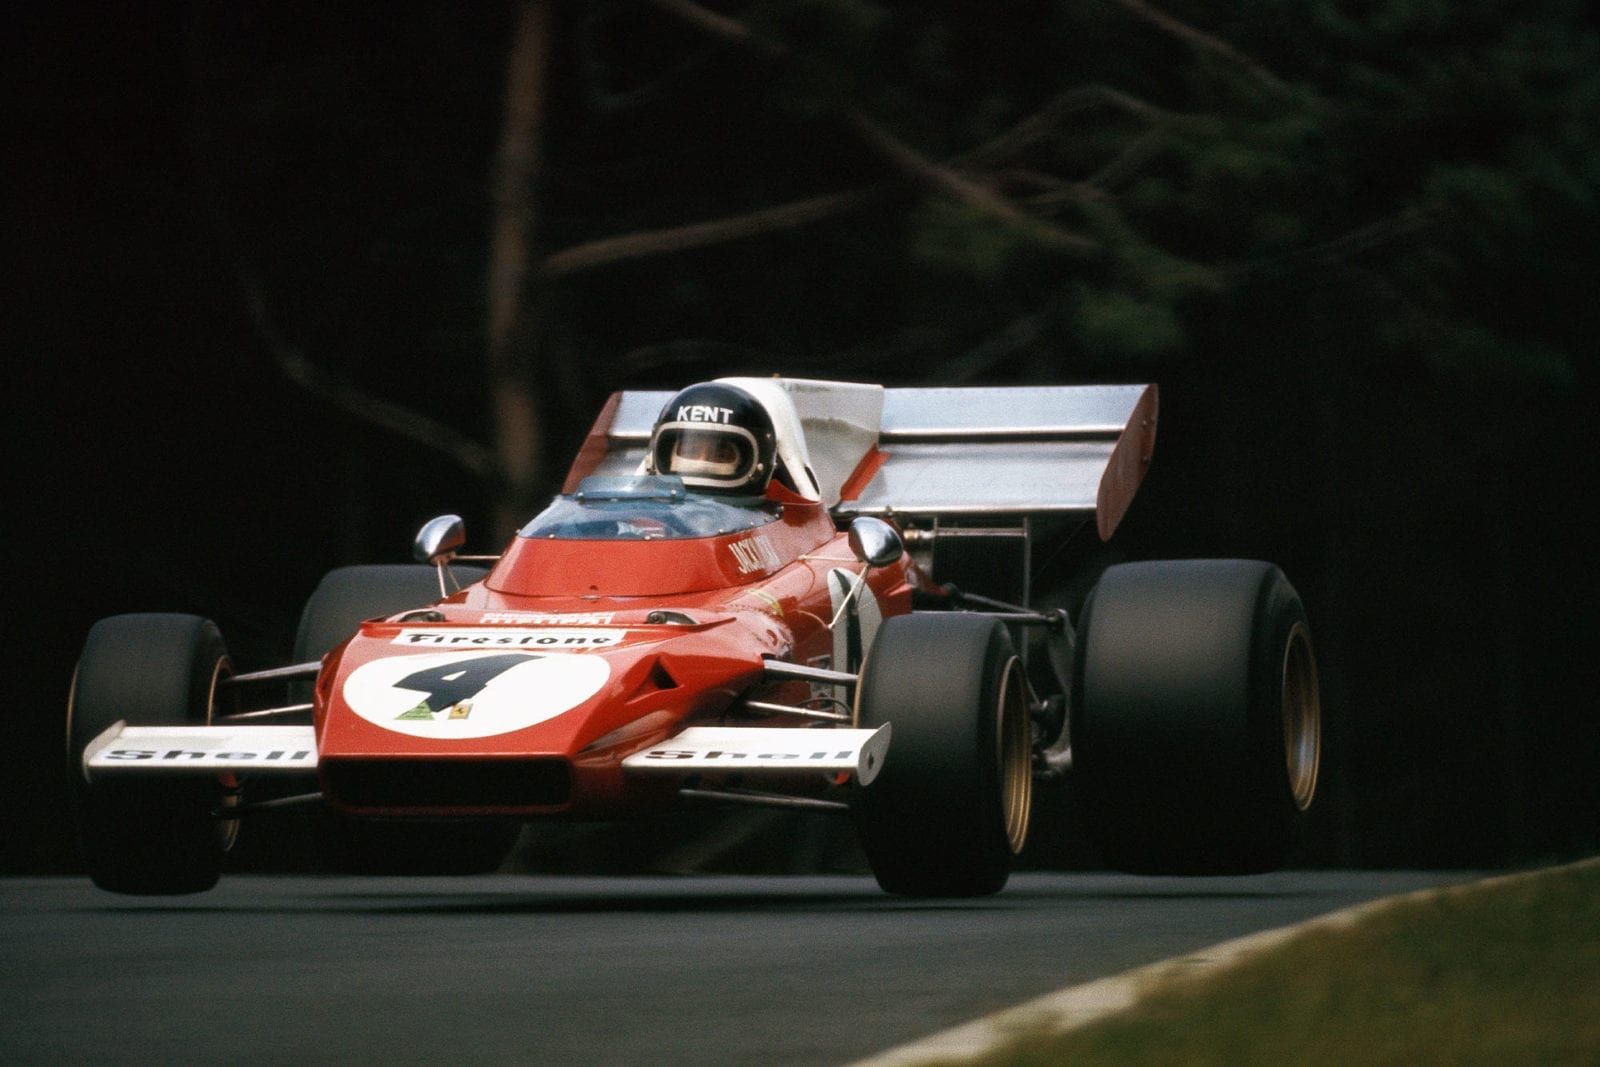 Jacky Ickx driving for Ferrari at the 1972 German Grand Prix.